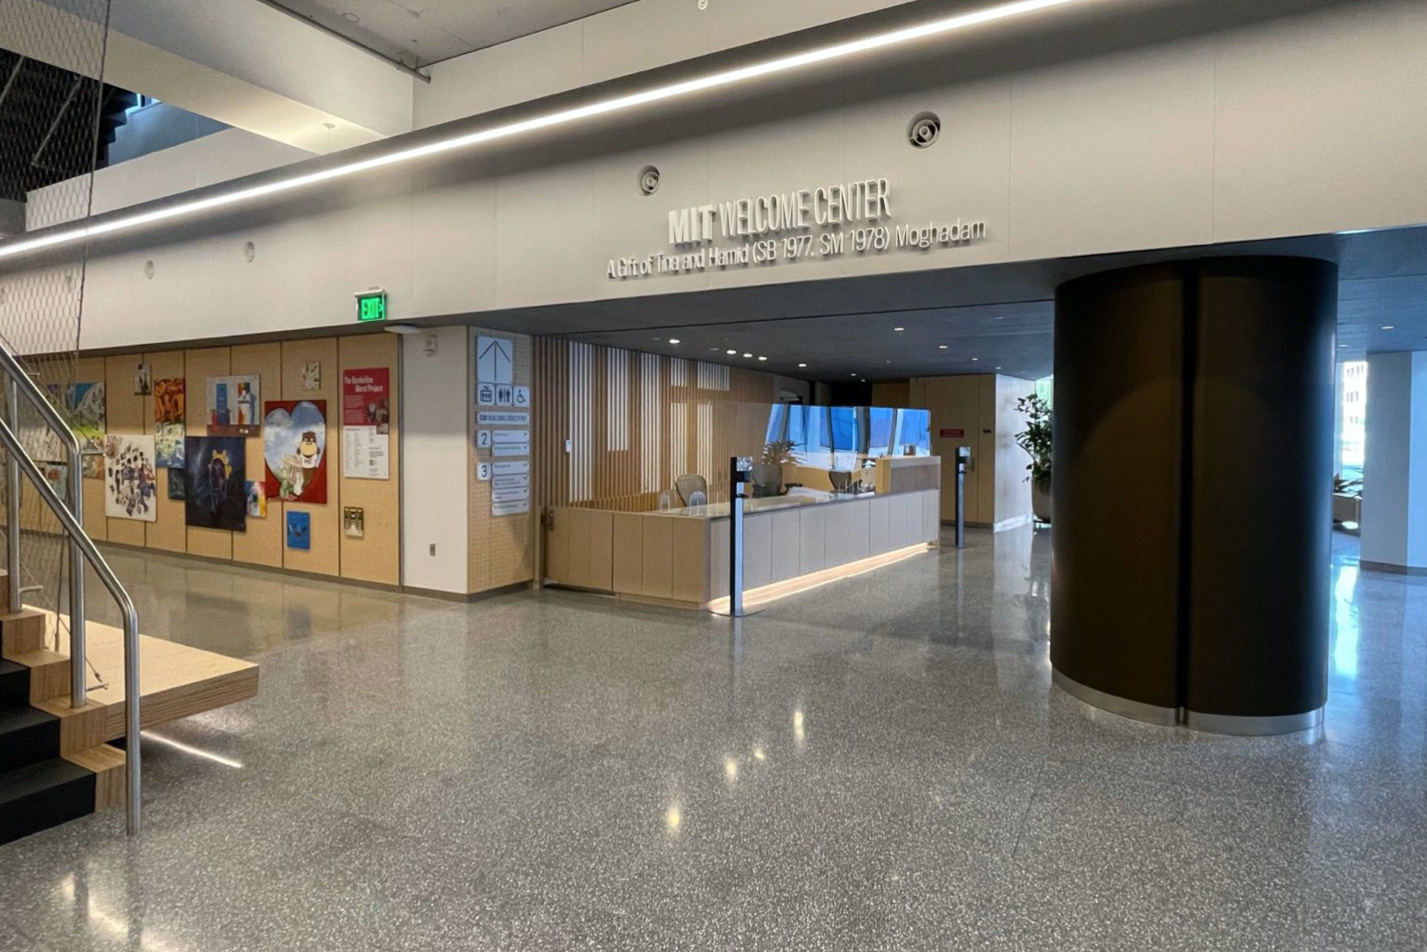 MIT Welcome Center opens in Kendall Square, MIT News